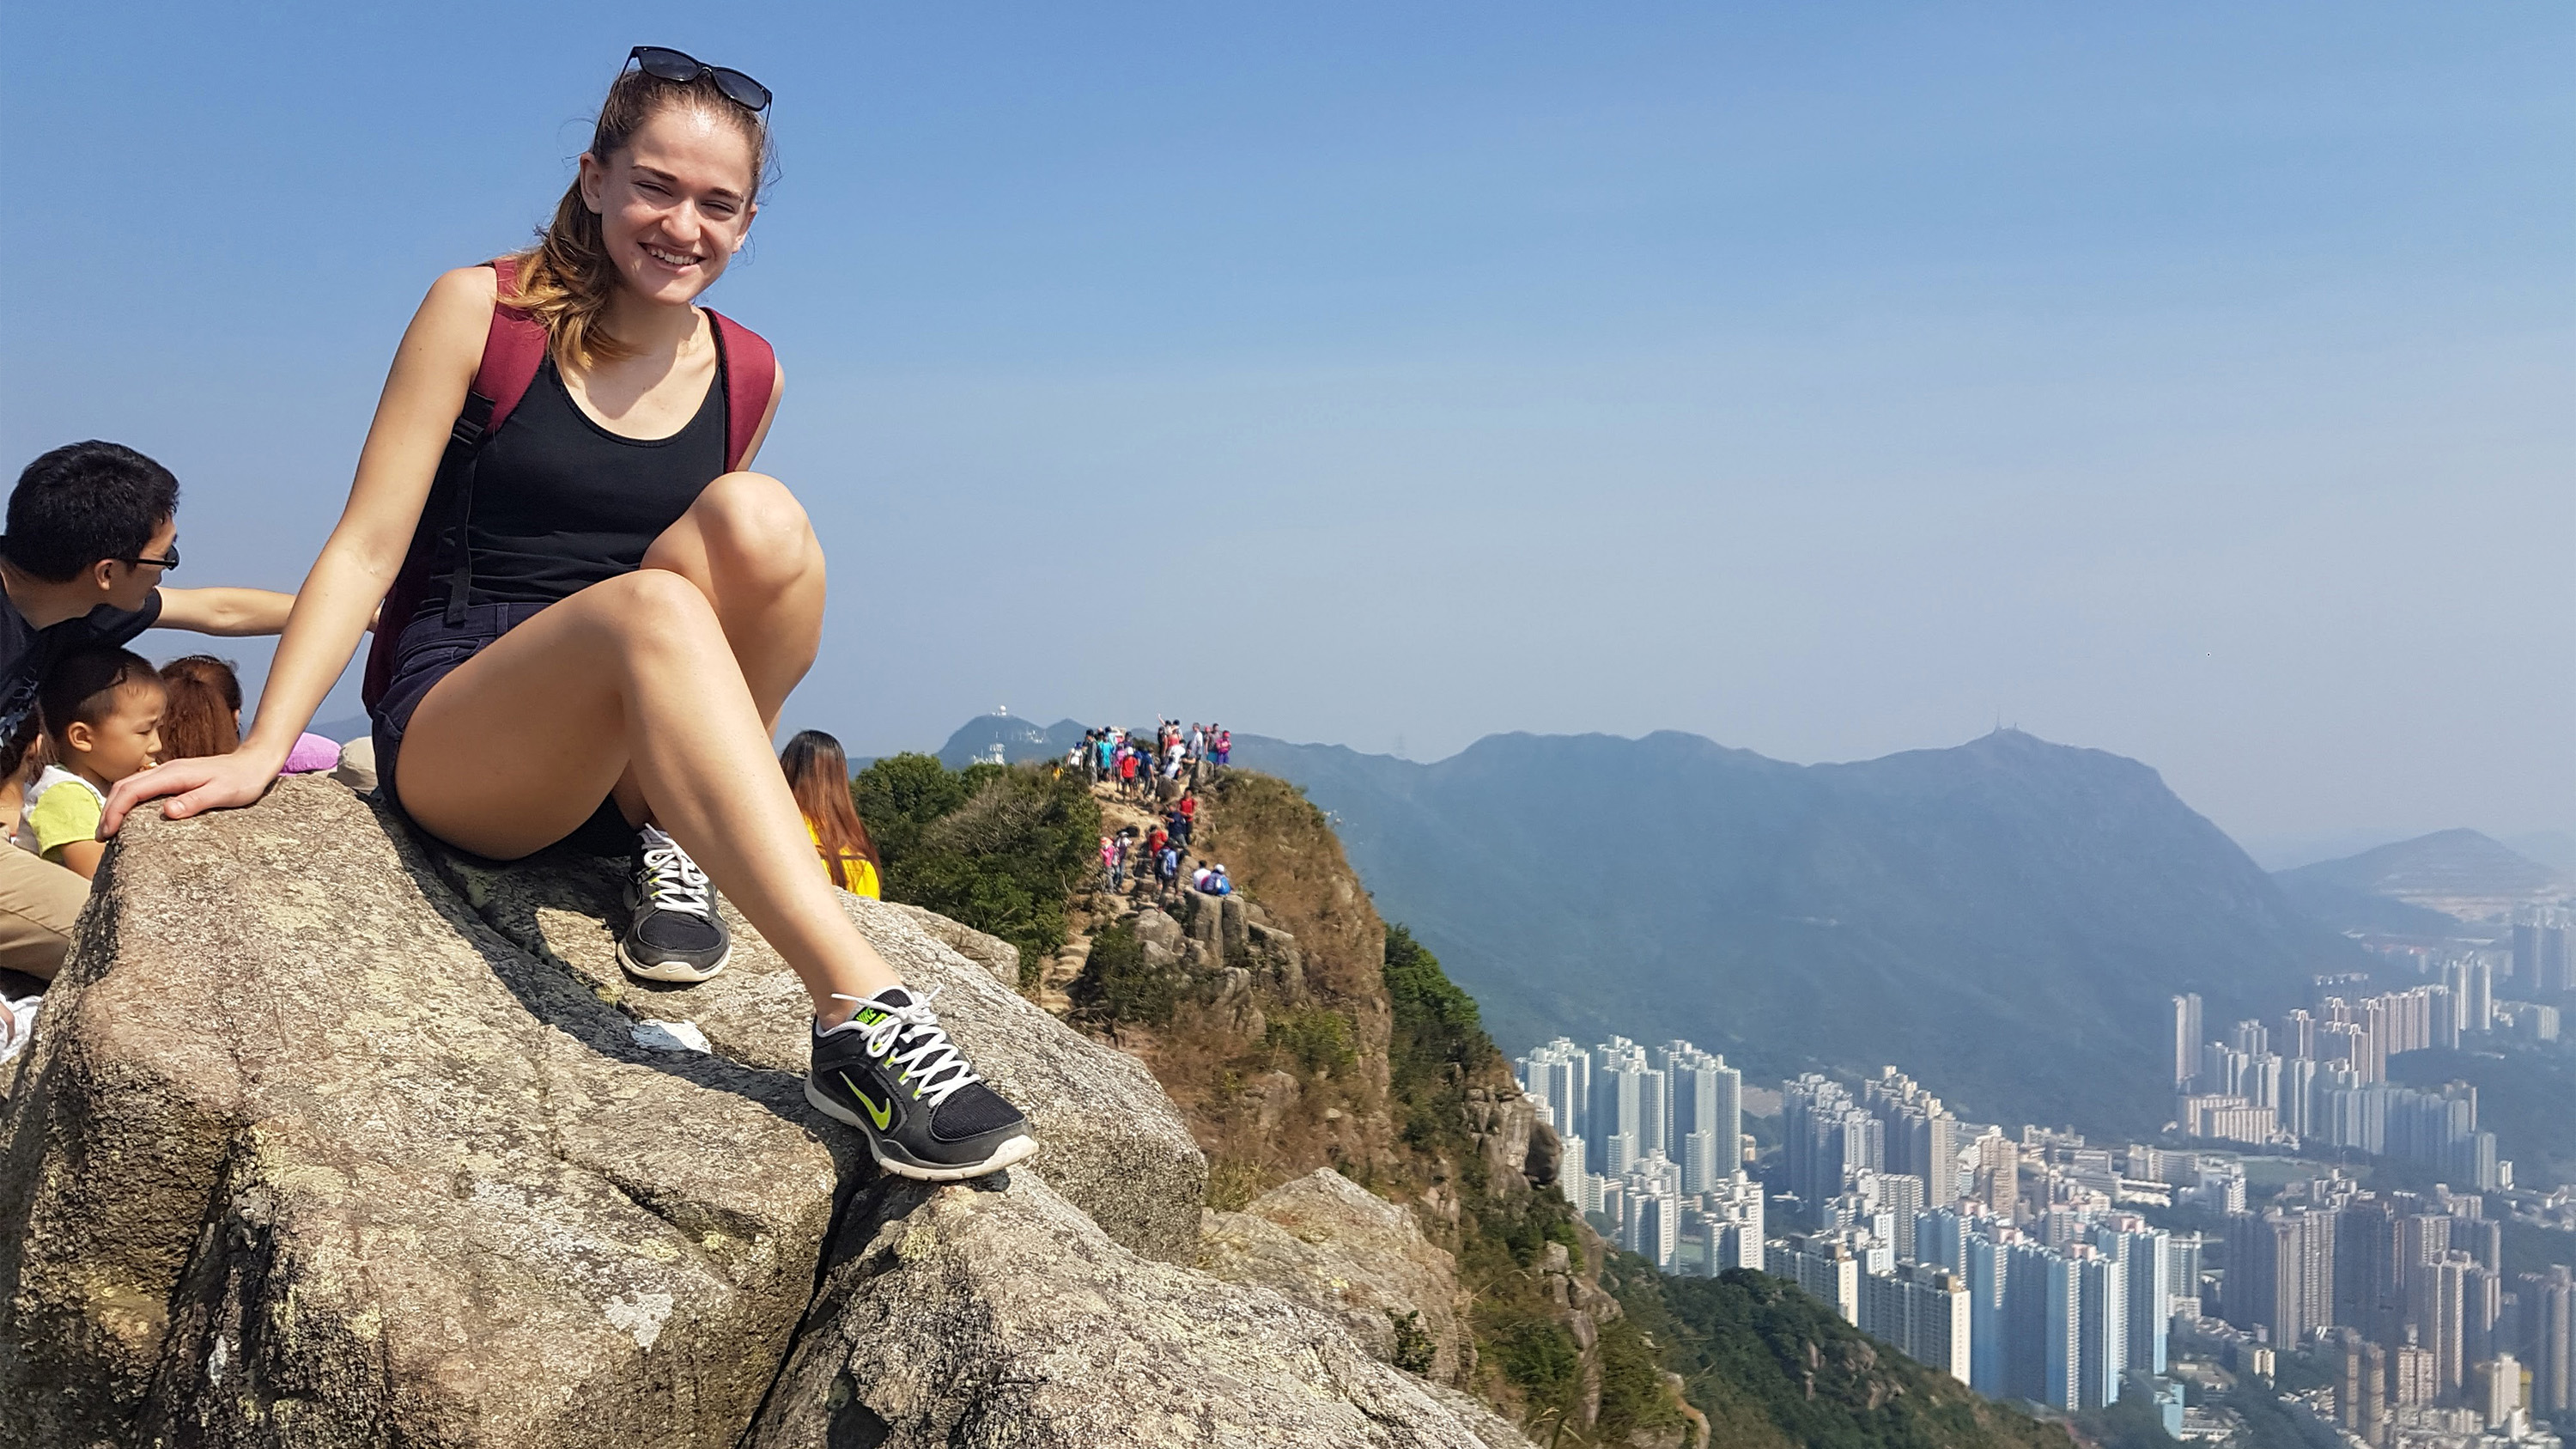 Charikleia enjoys hiking with her friends in Hong Kong to avoid burn-out and refresh her mind. The Lion Rock is one of her favorite hiking trails.